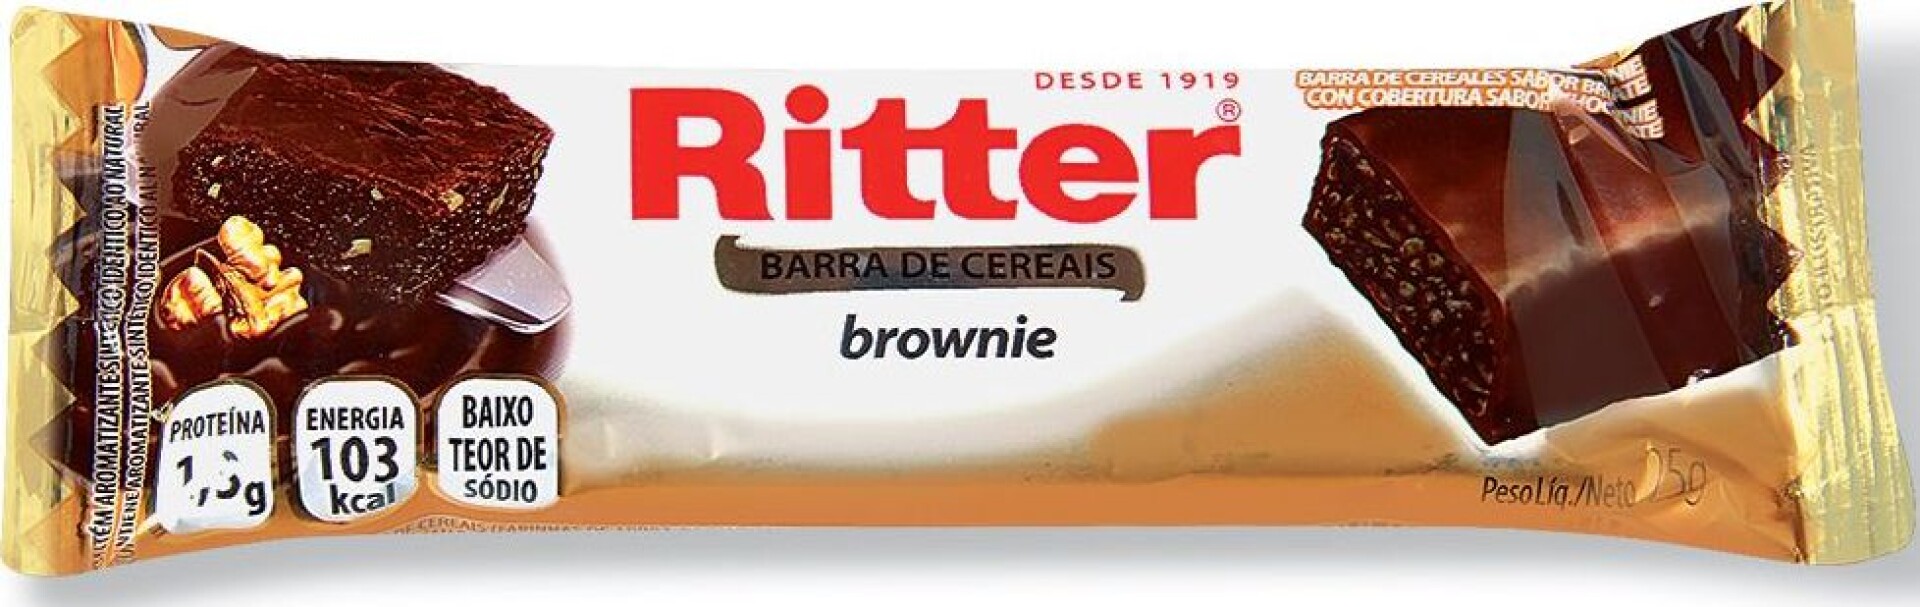 BARRA CEREAL RITTER 25G BROWNIE 